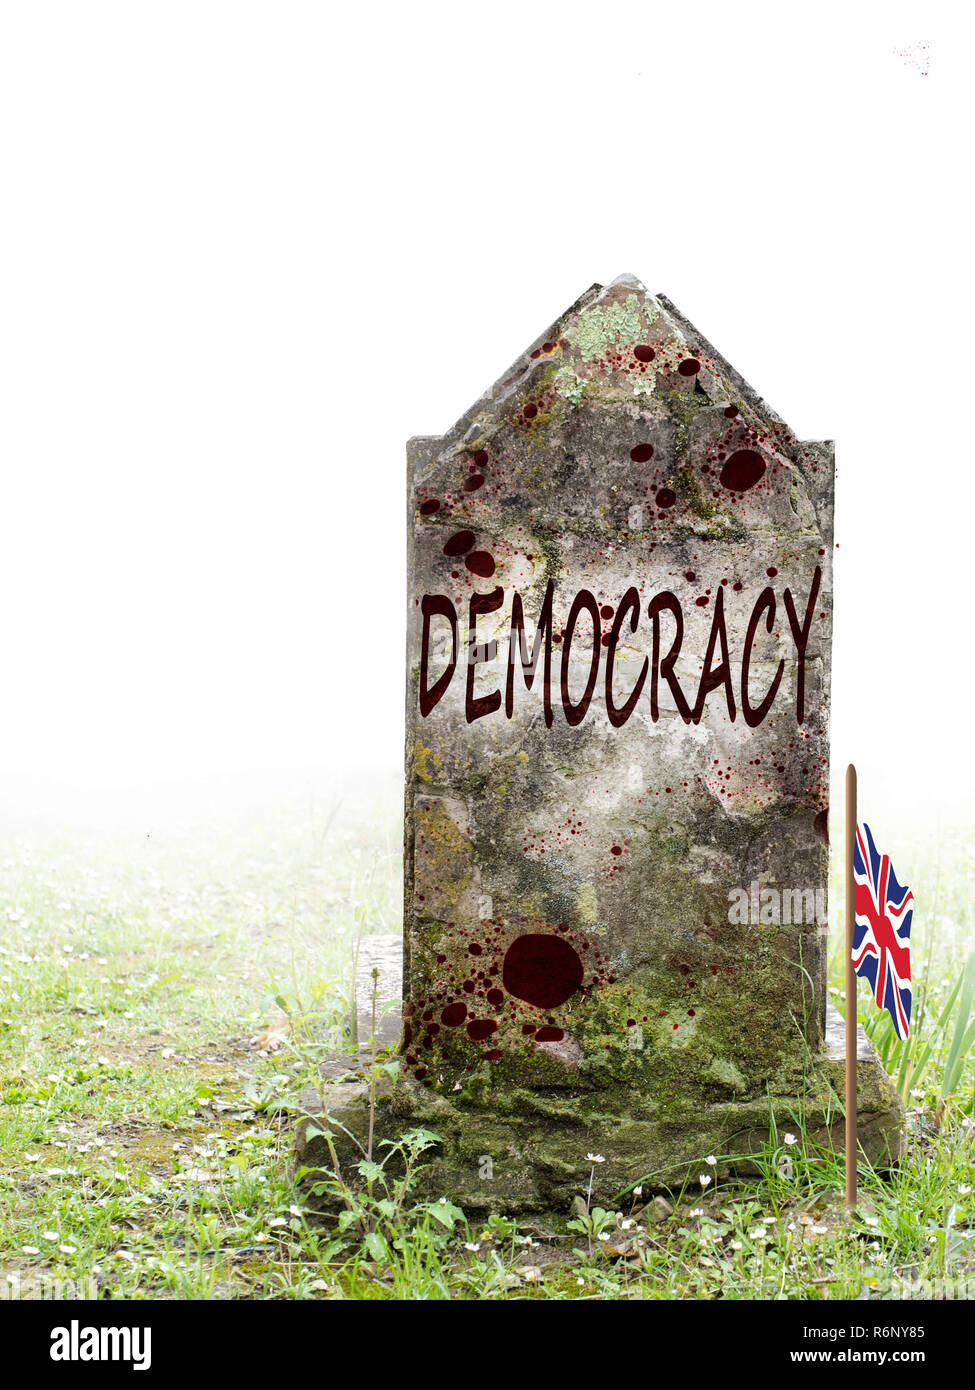 Democracy is dead, UK EU referendum politics. Ancient gravestone in fog, with blood and bedraggled Union Jack flag. Stock Photo